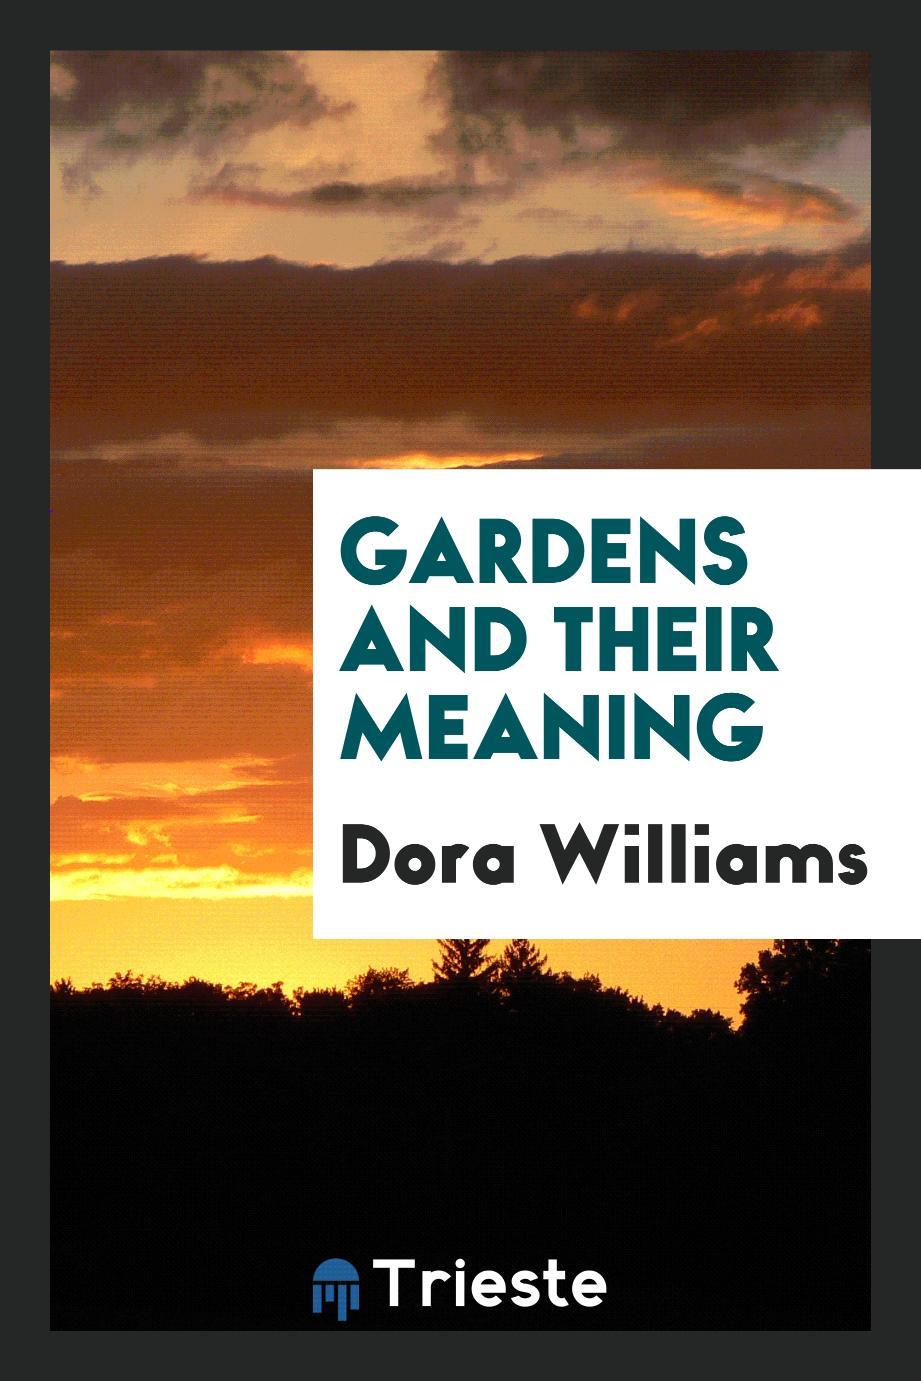 Gardens and their meaning